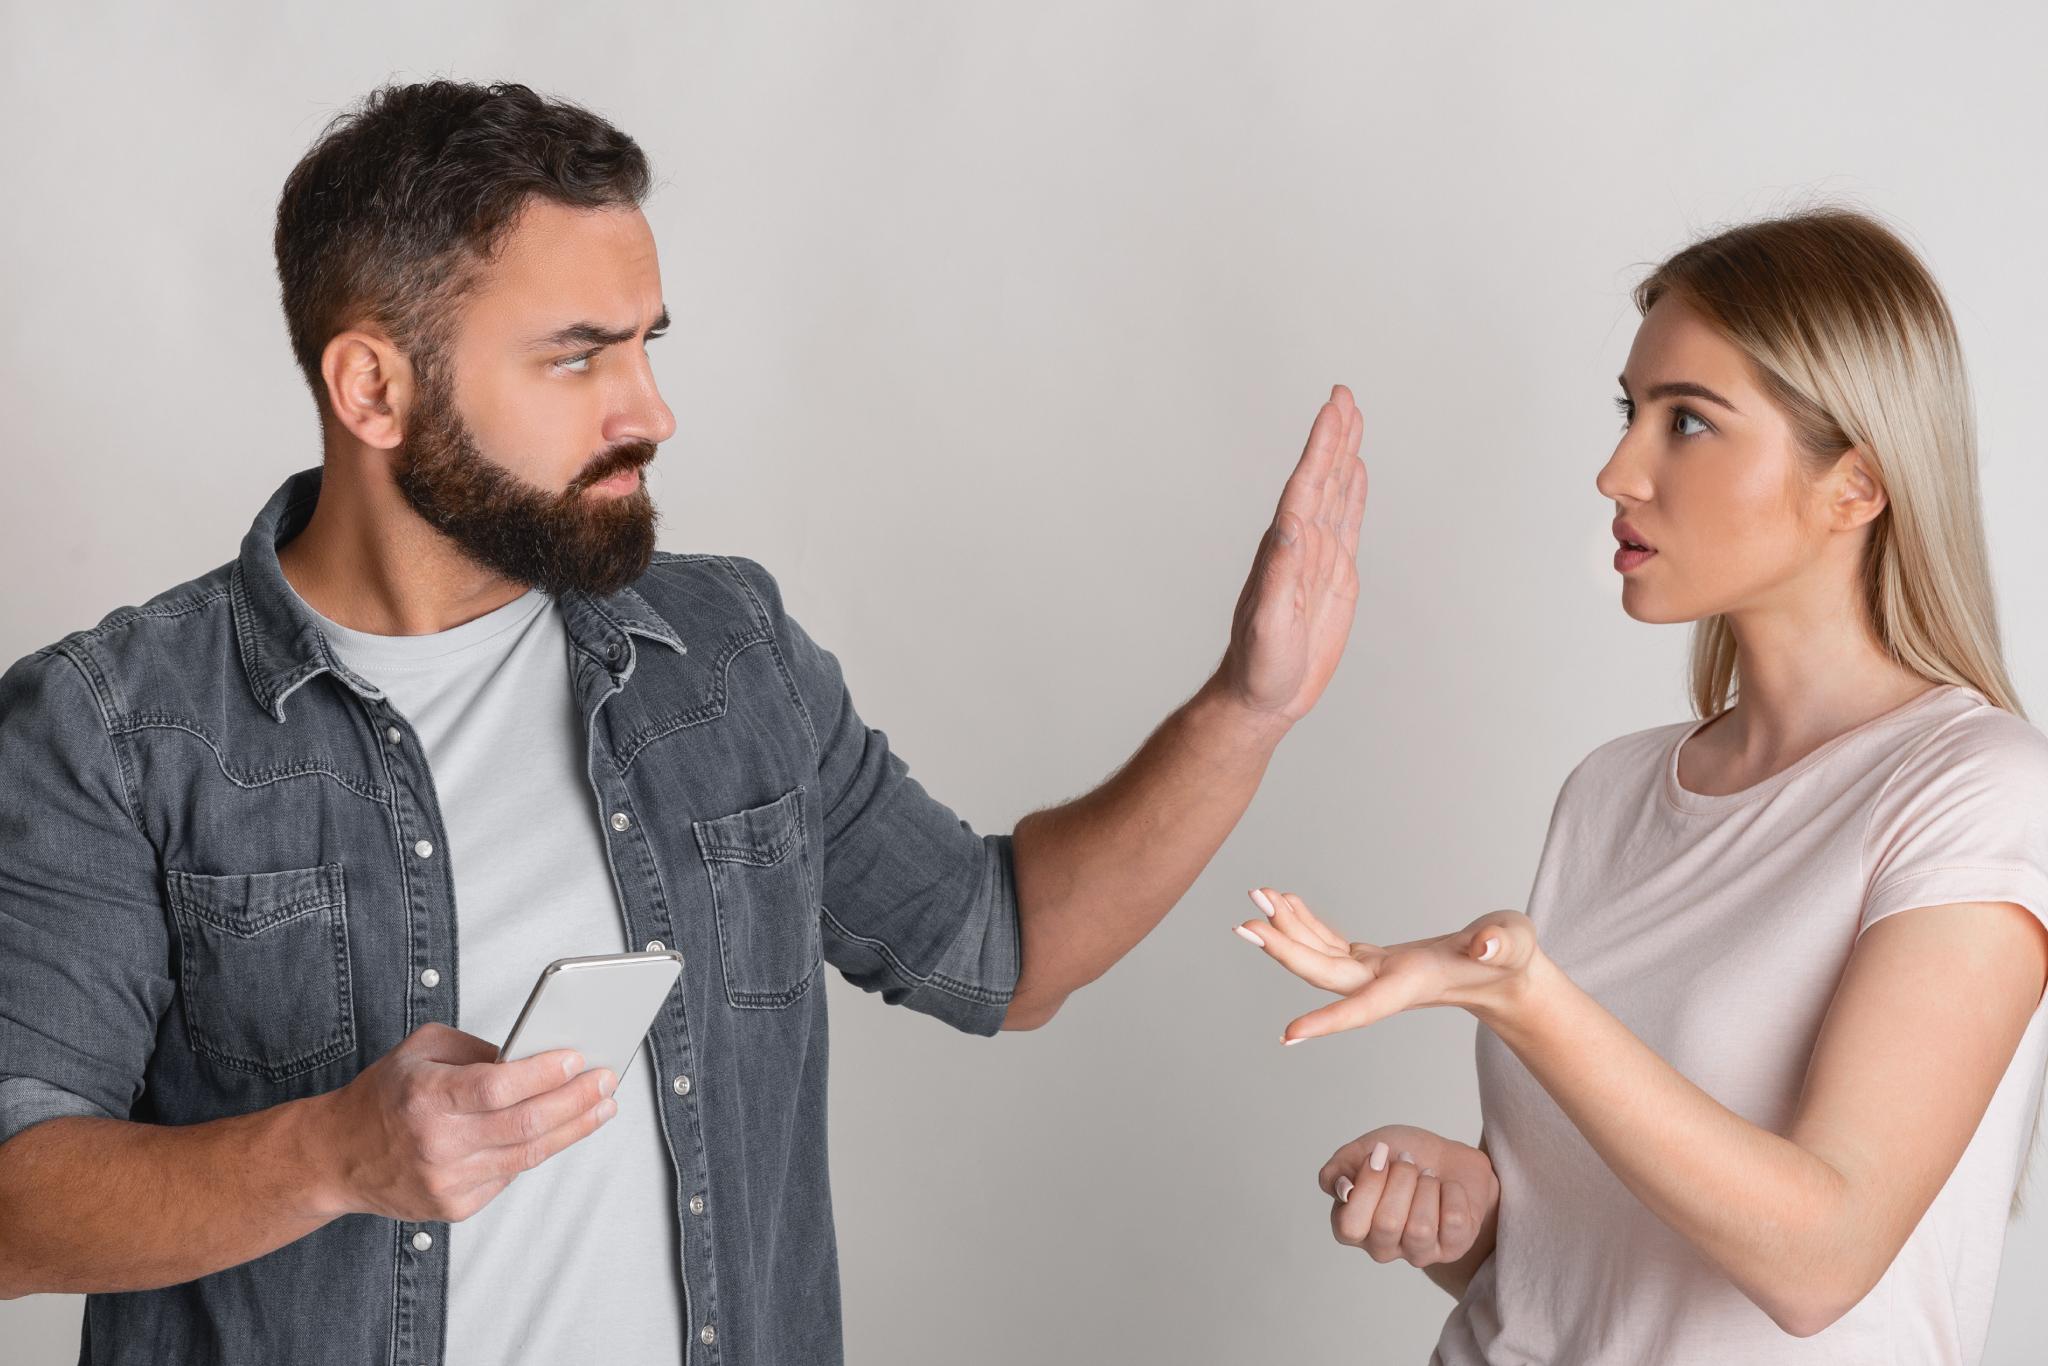 Controlling Behavior in a Relationship